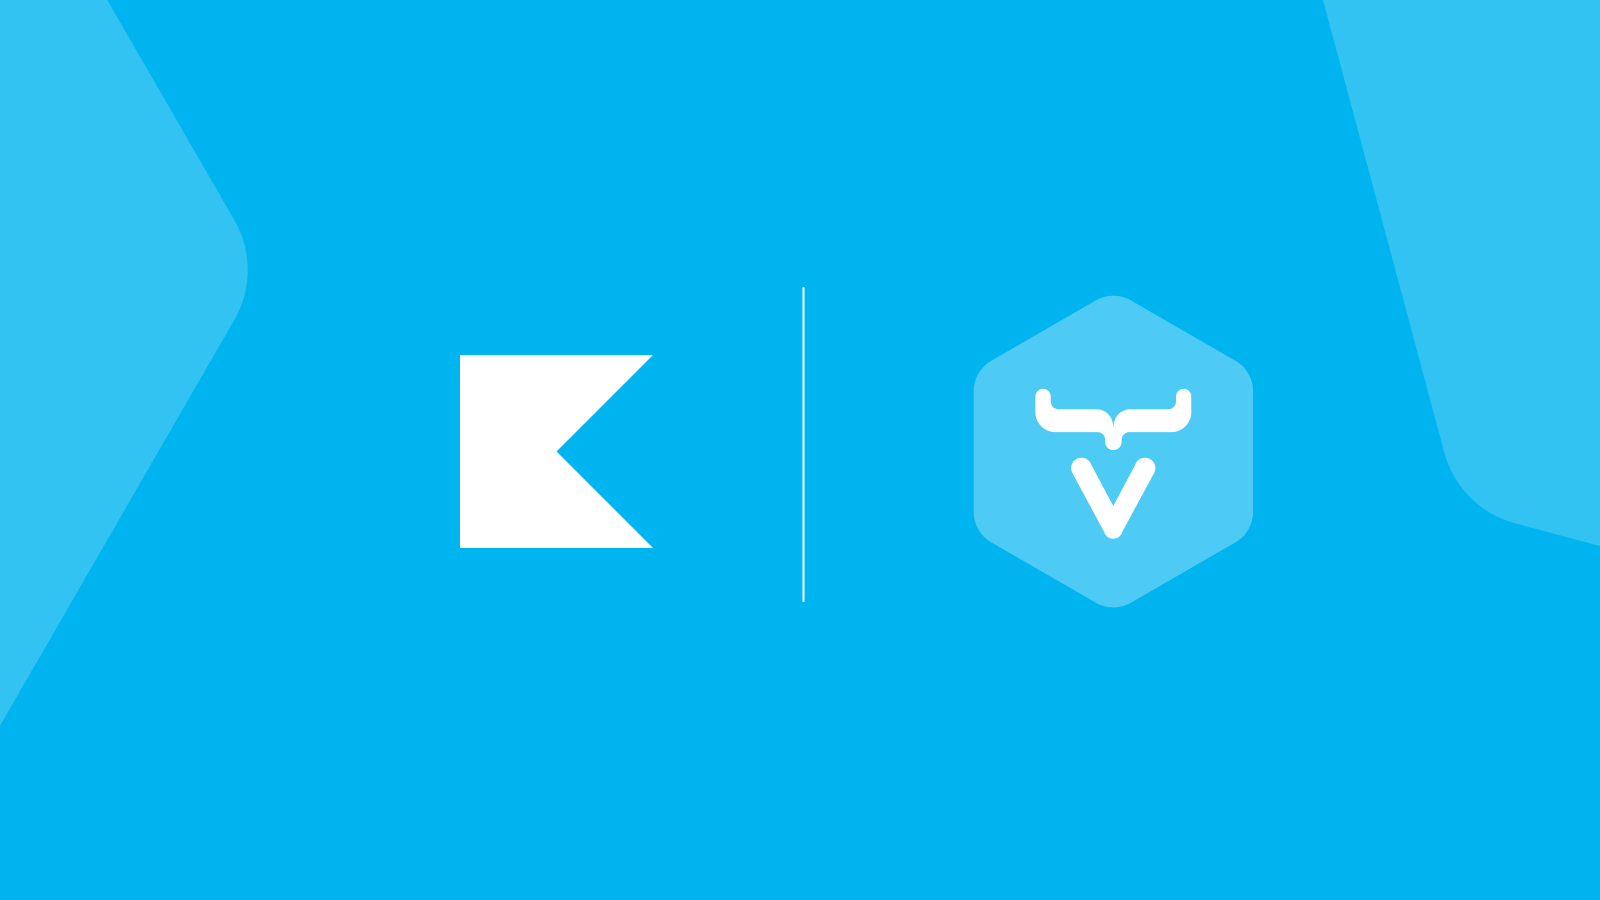 Kotlin and Vaadin logos side by side in white